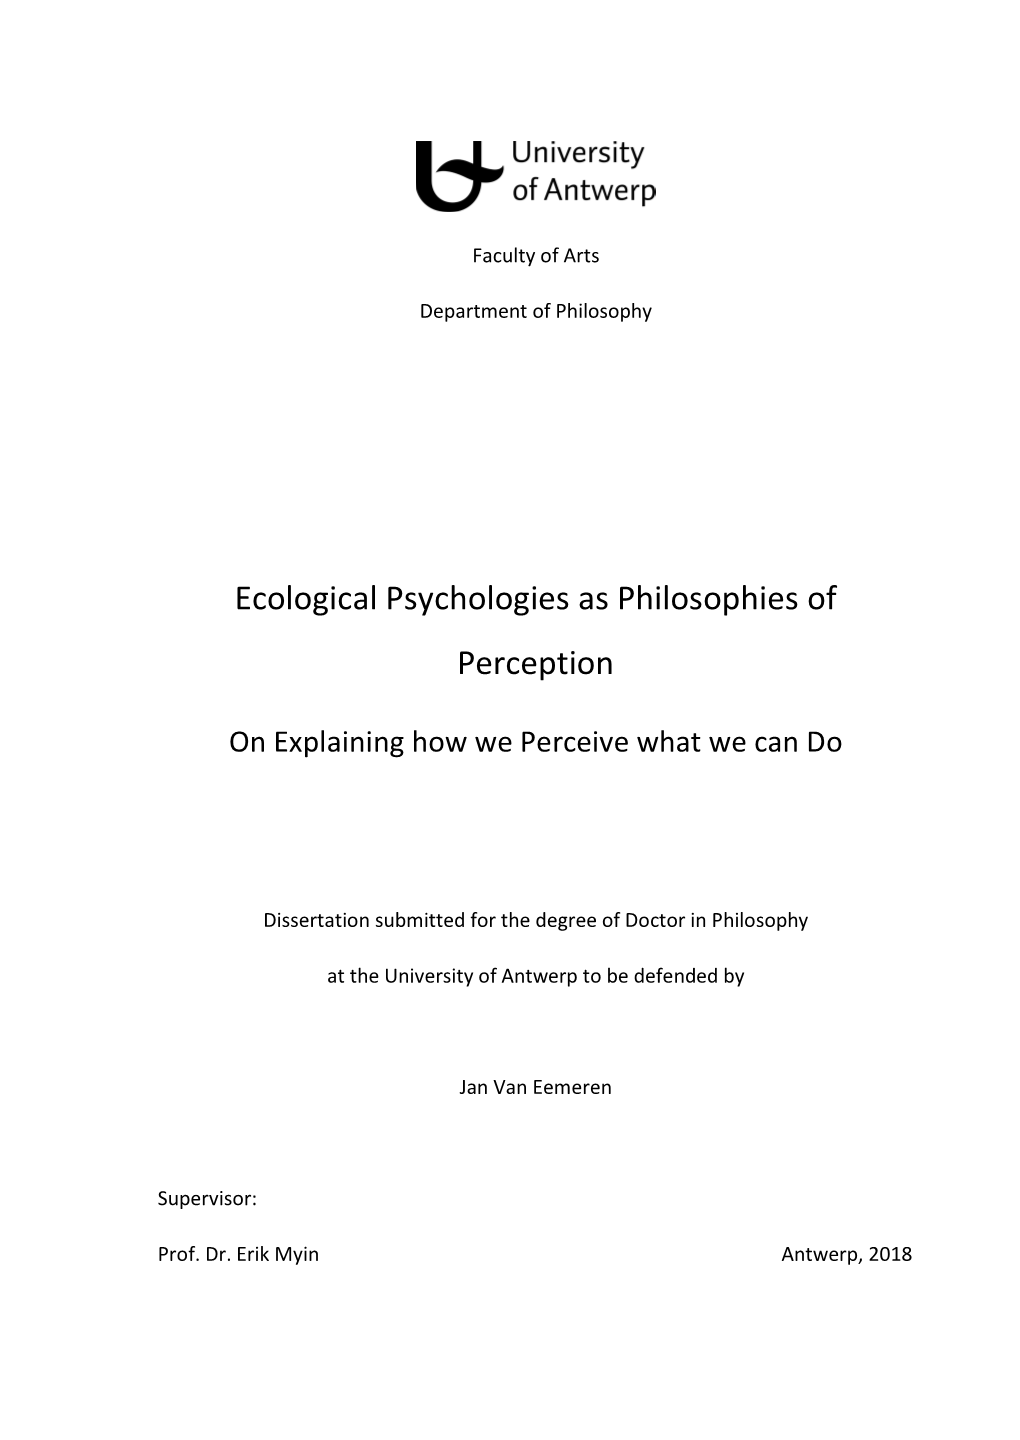 Ecological Psychologies As Philosophies of Perception